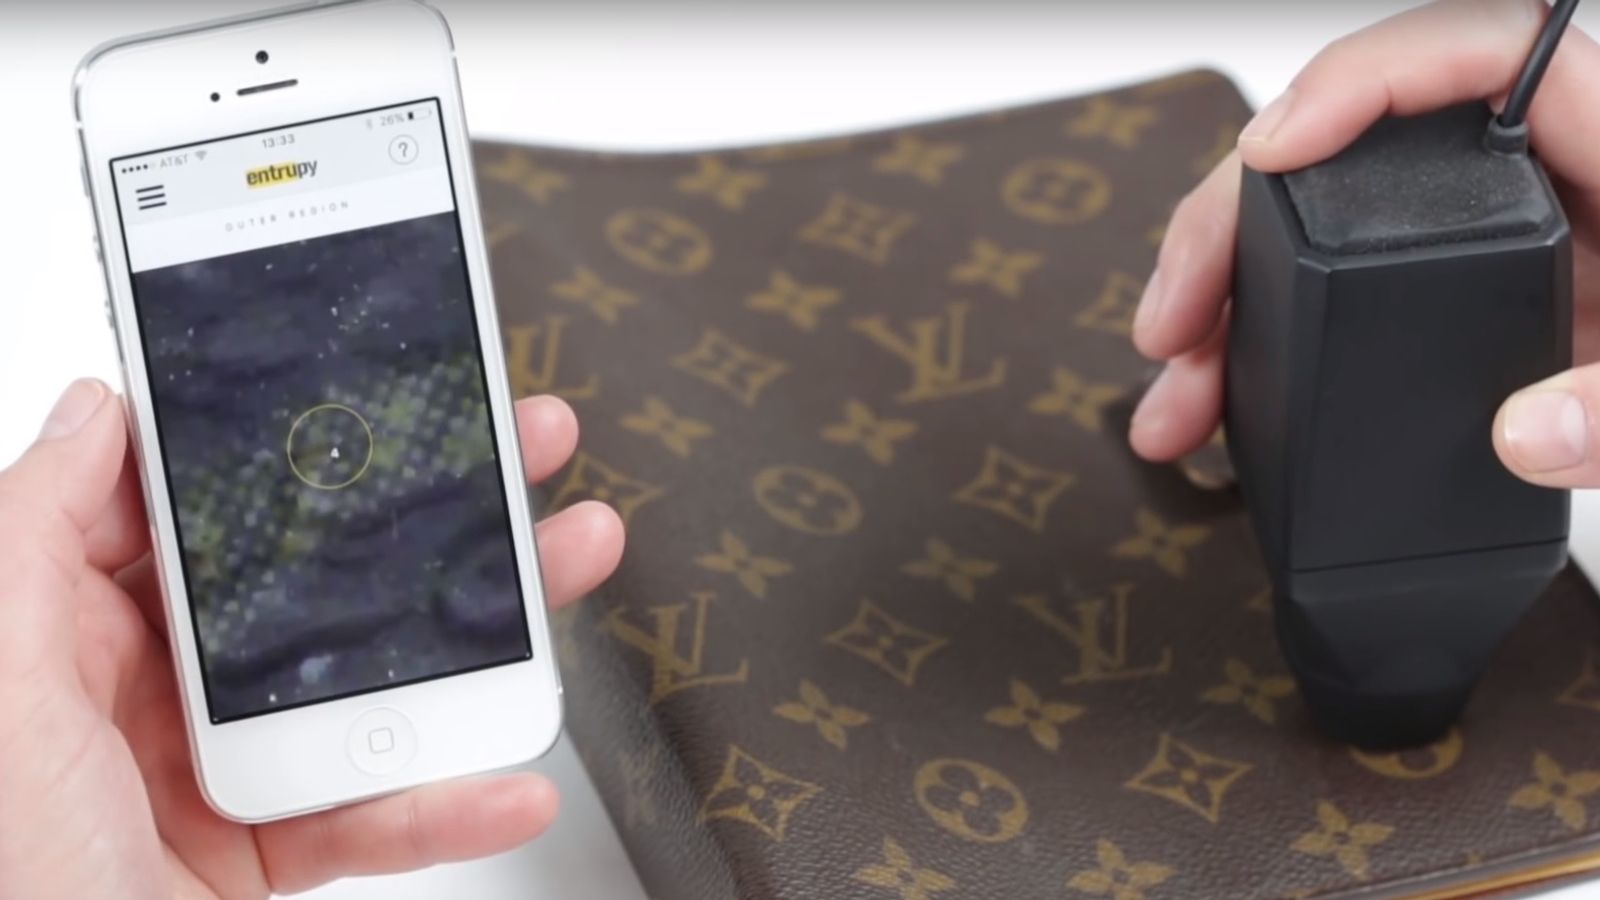 Gadget can spot fake Chanel, Gucci and Louis Vuitton bags